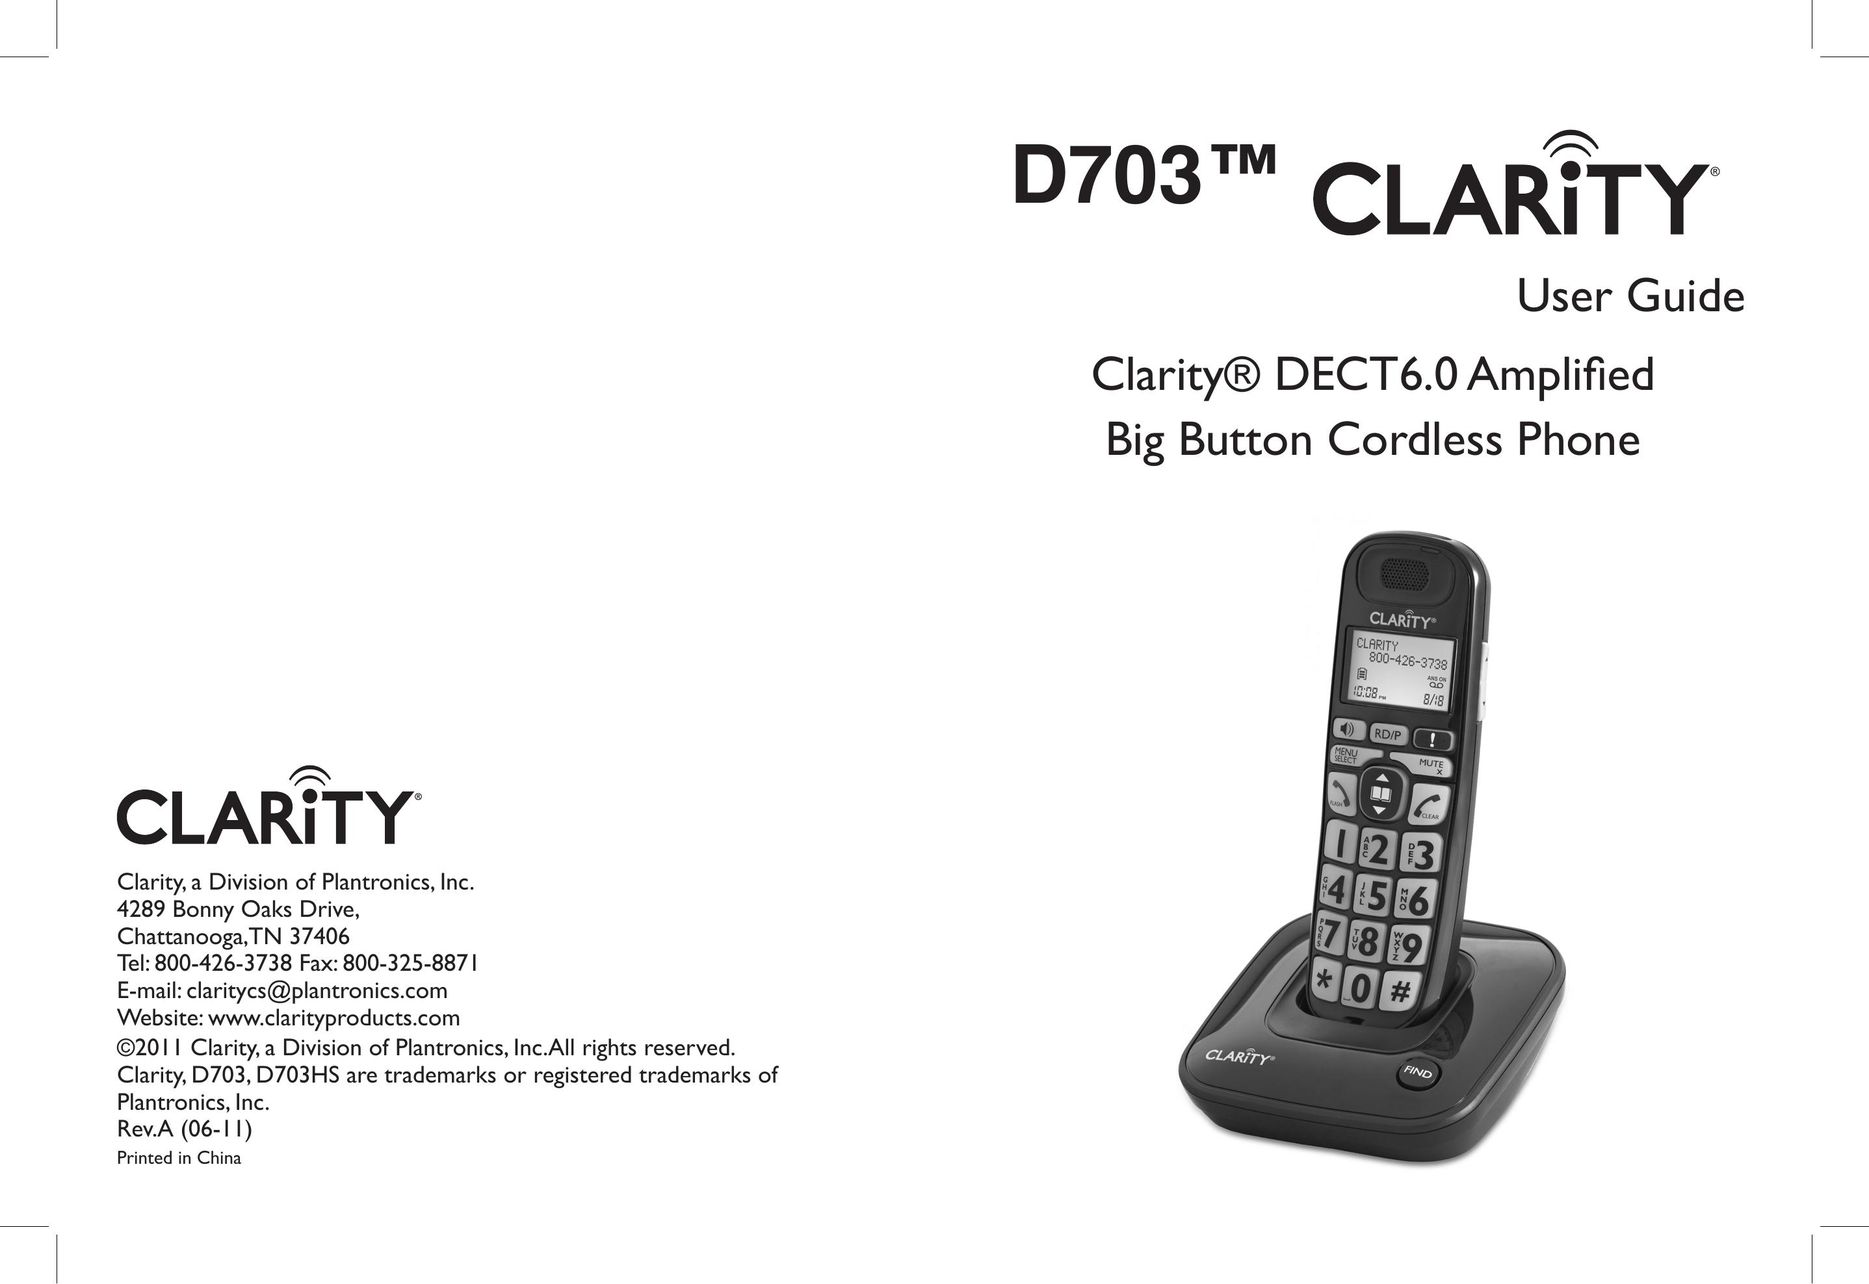 Clarity D703 Amplified Phone User Manual (Page 1)